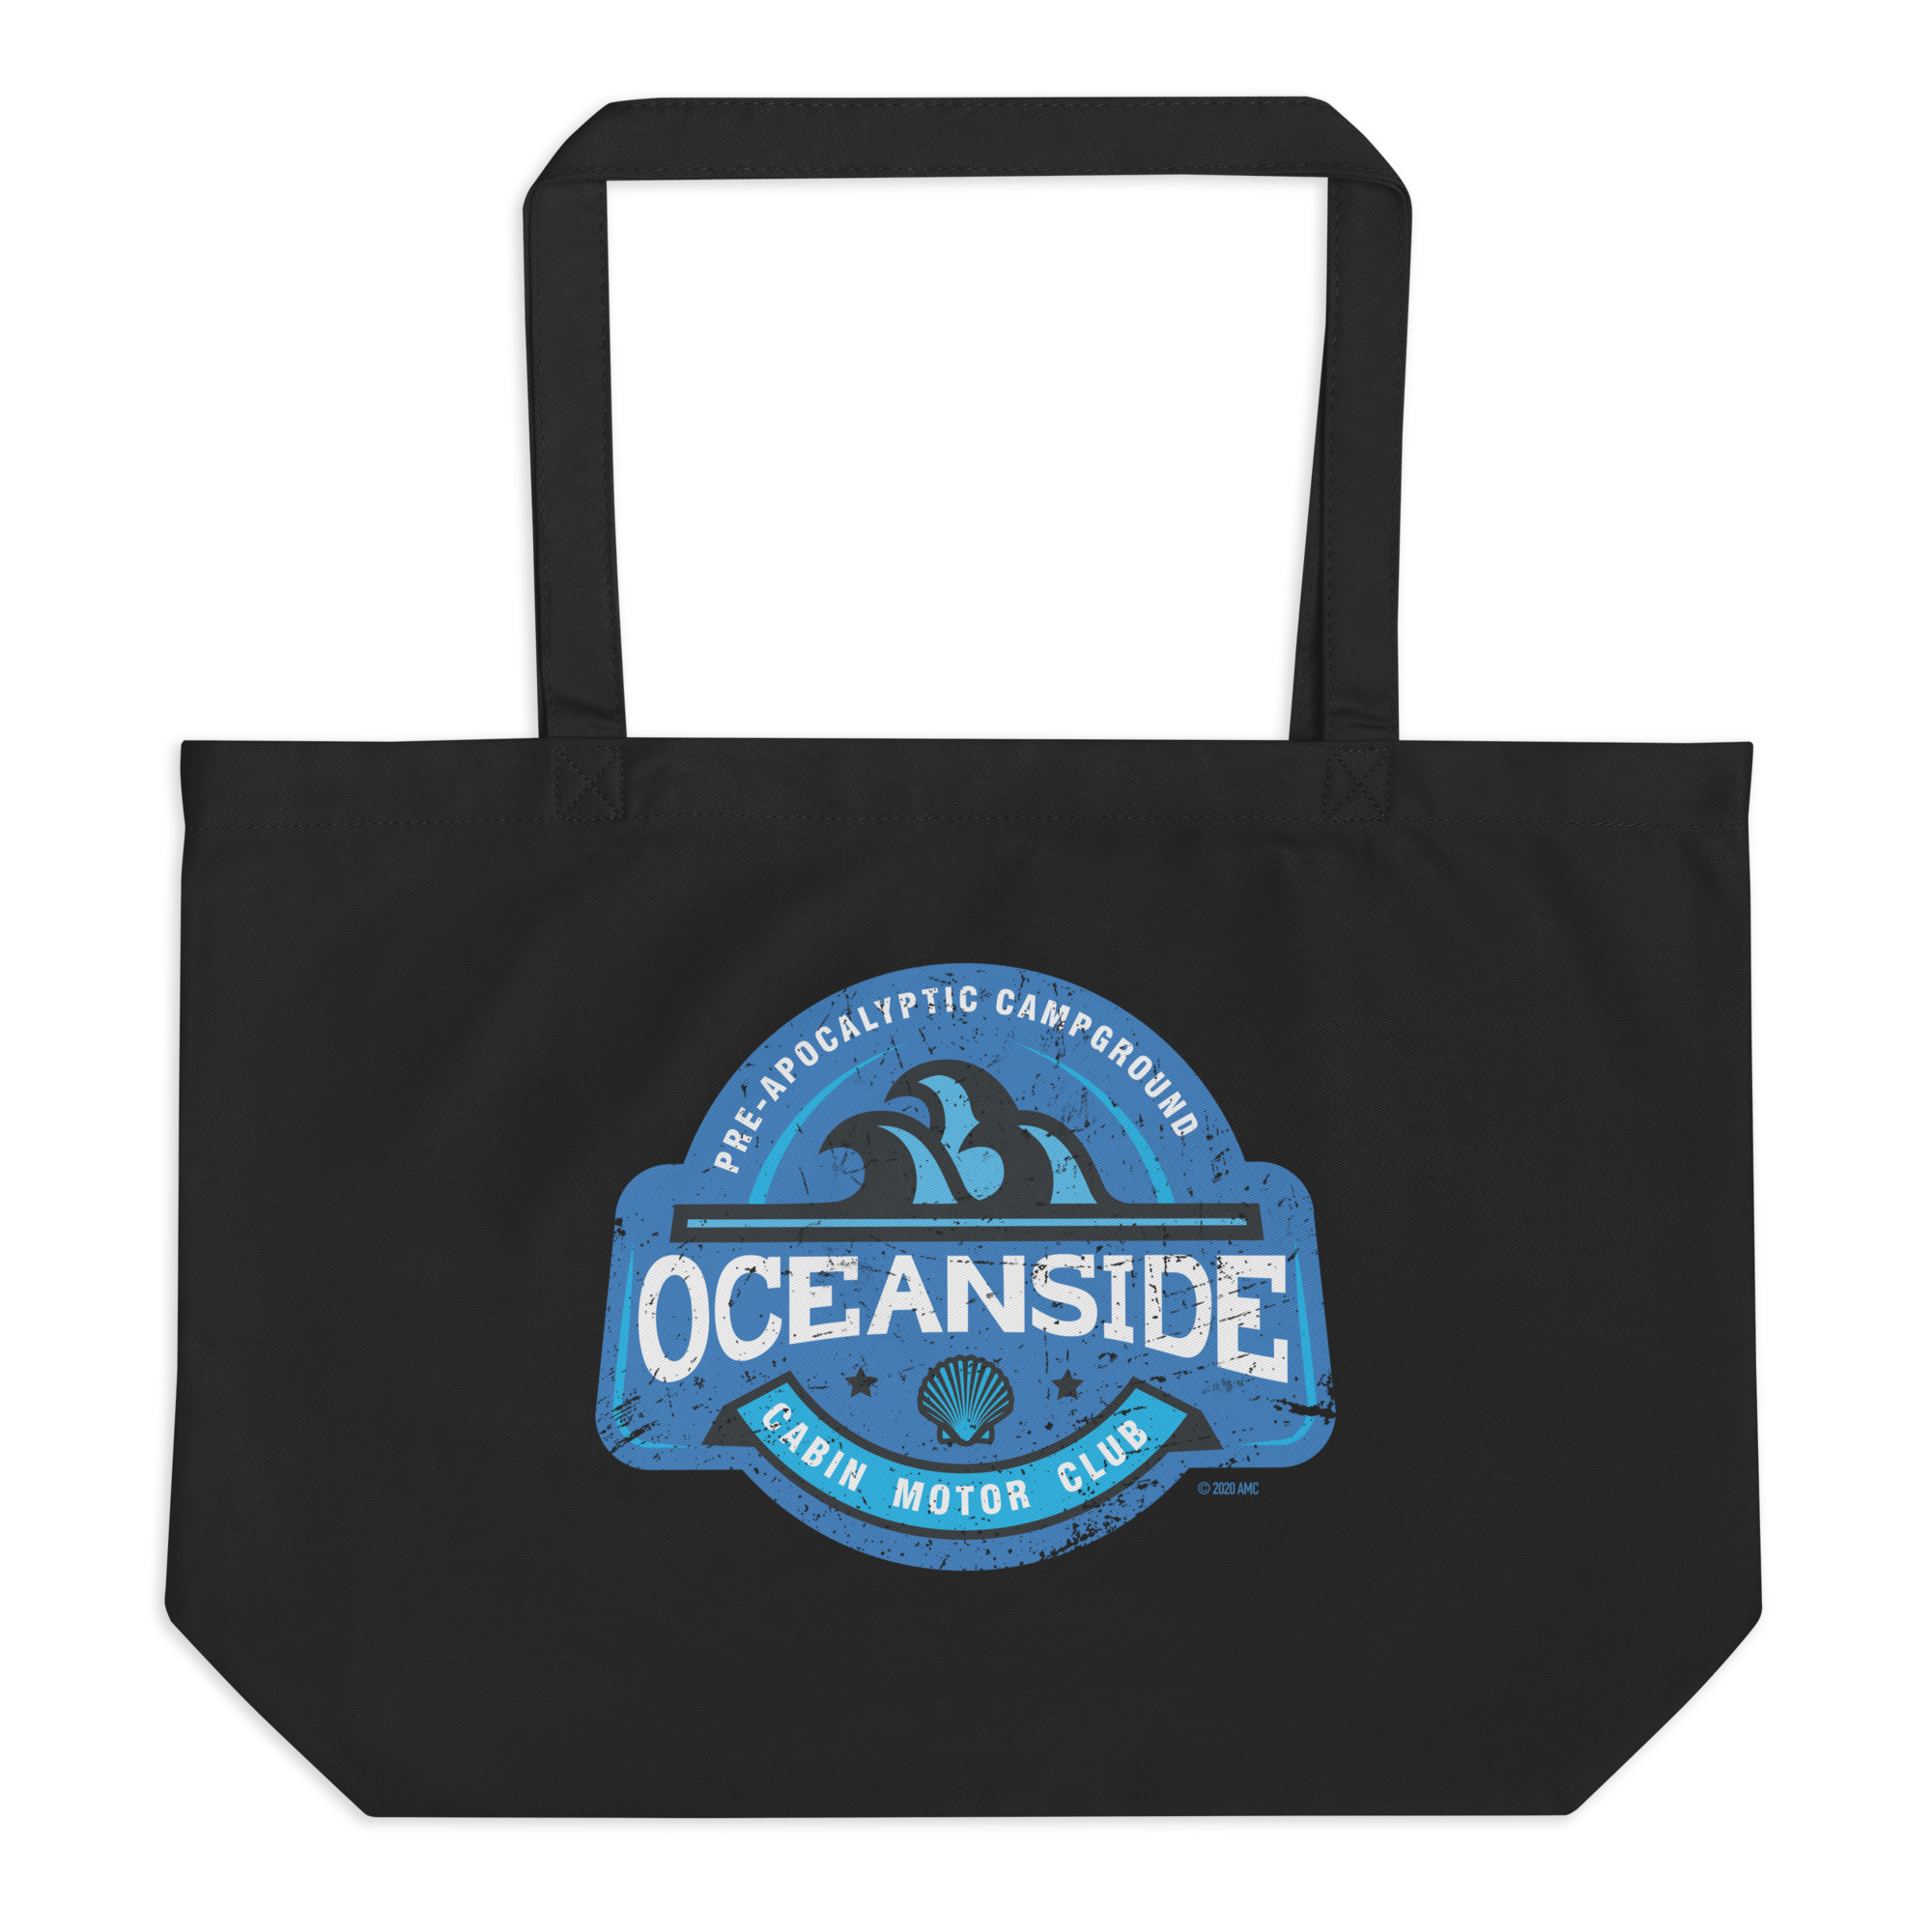 The Walking Dead Oceanside Large Eco Tote-0